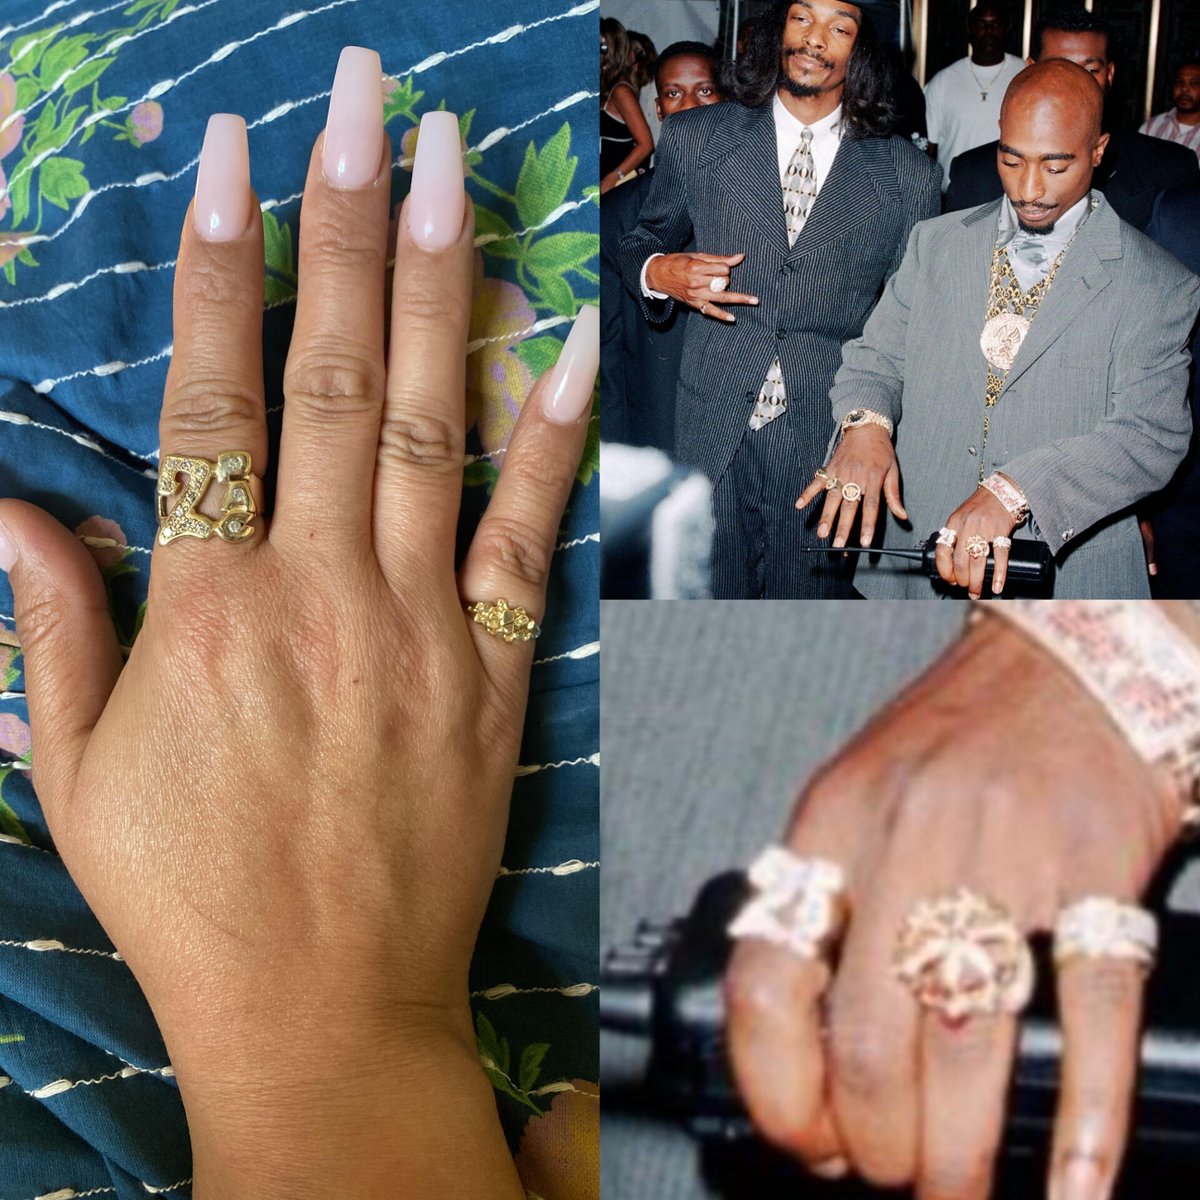 Tupac Shakur's 2Pac Ring worn during his last public appearance at the 1996 MTV Video Music Awards has potentially been found‼️

According to a reddit user, she found this at a pawn shop. She doesn't know of the exact authenticity as of right now. 

#2pac #tupacshakur